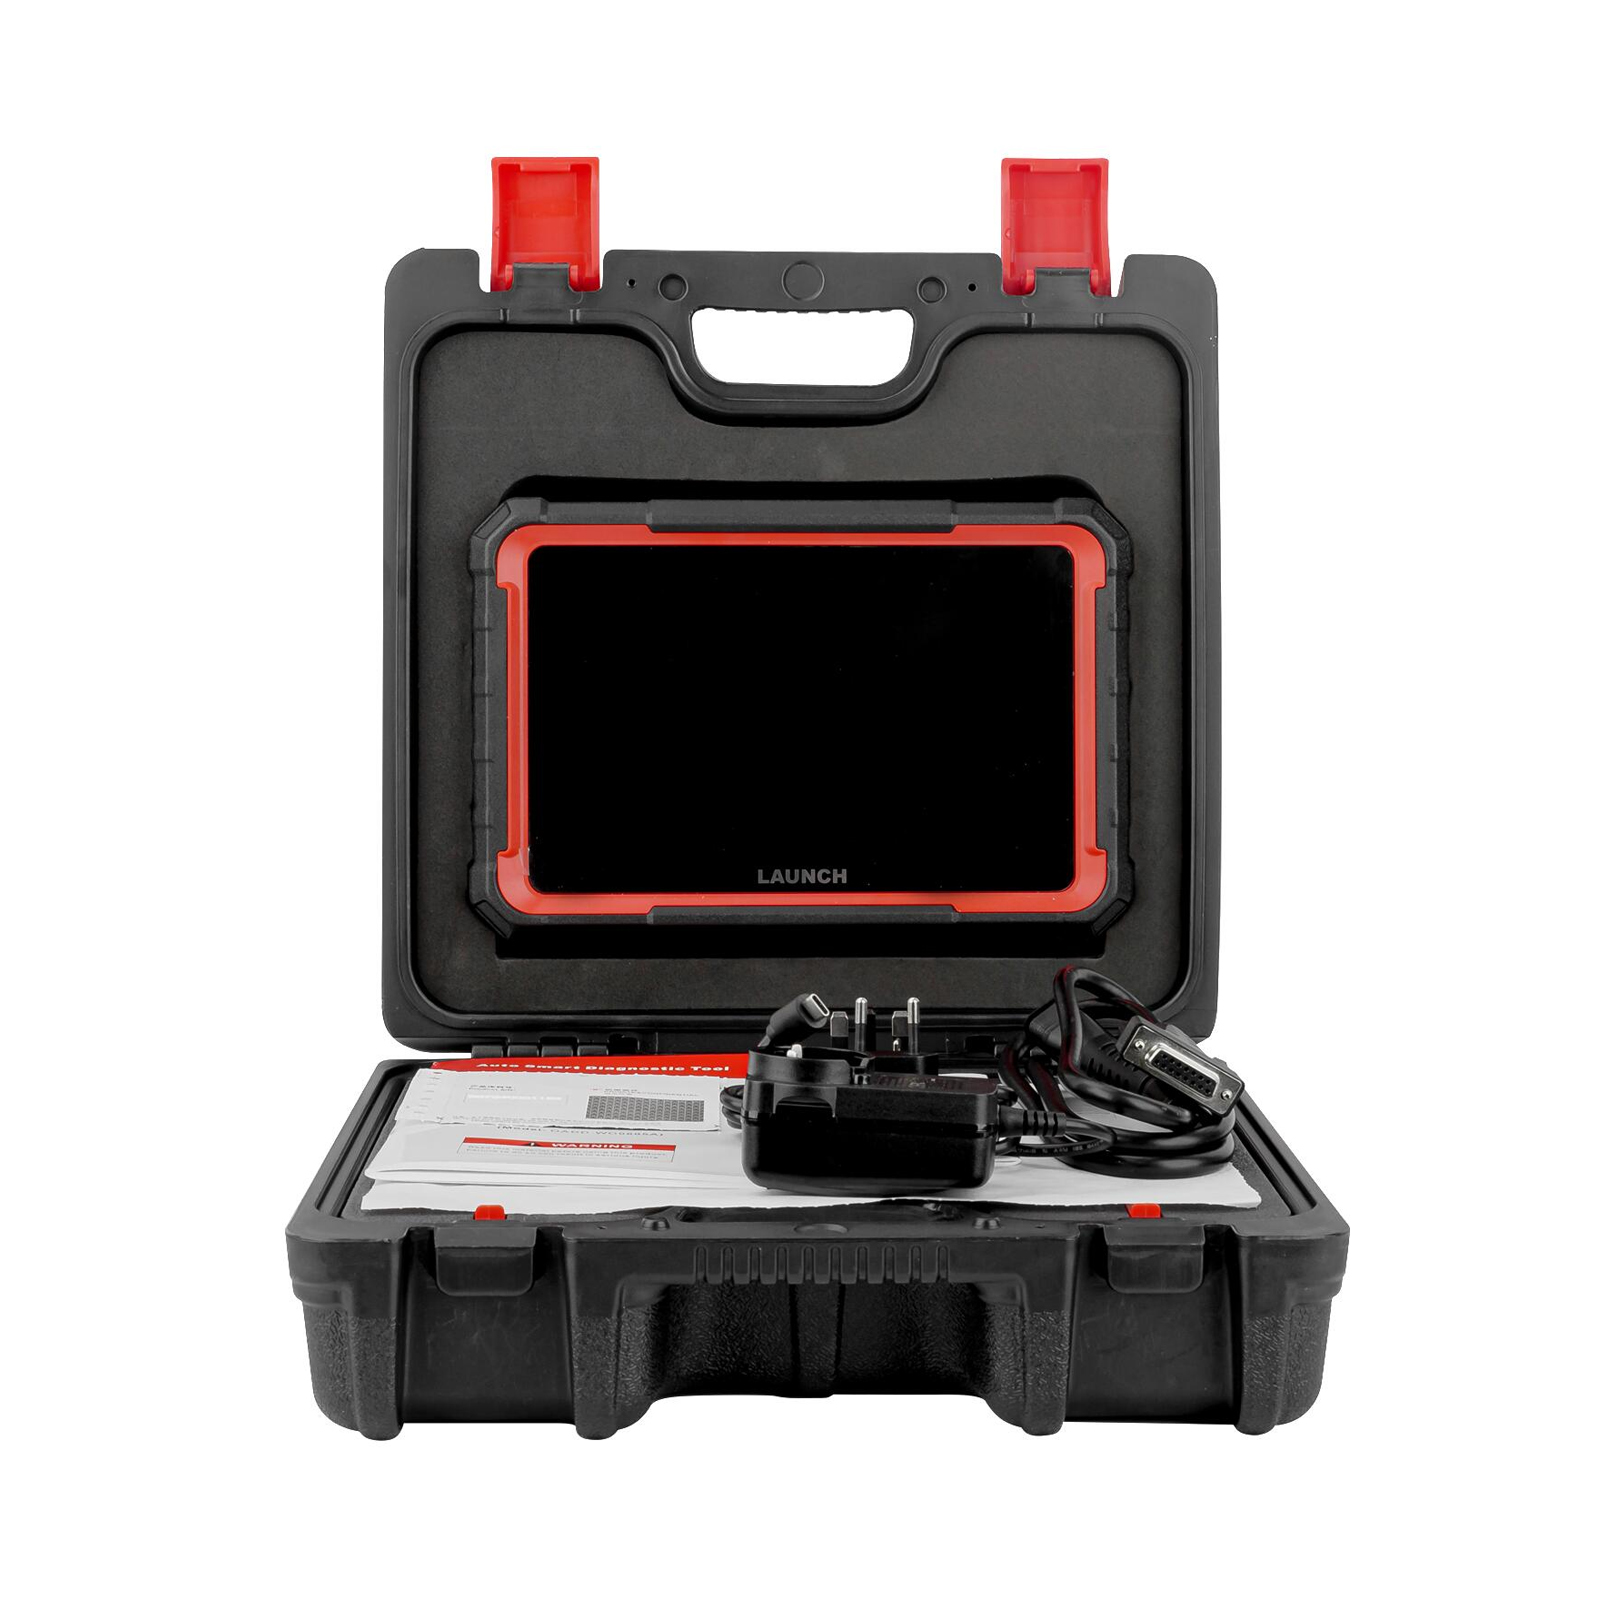 LAUNCH X431 PRO ELITE 8'inch GL Version Diagnostic Tool Supports